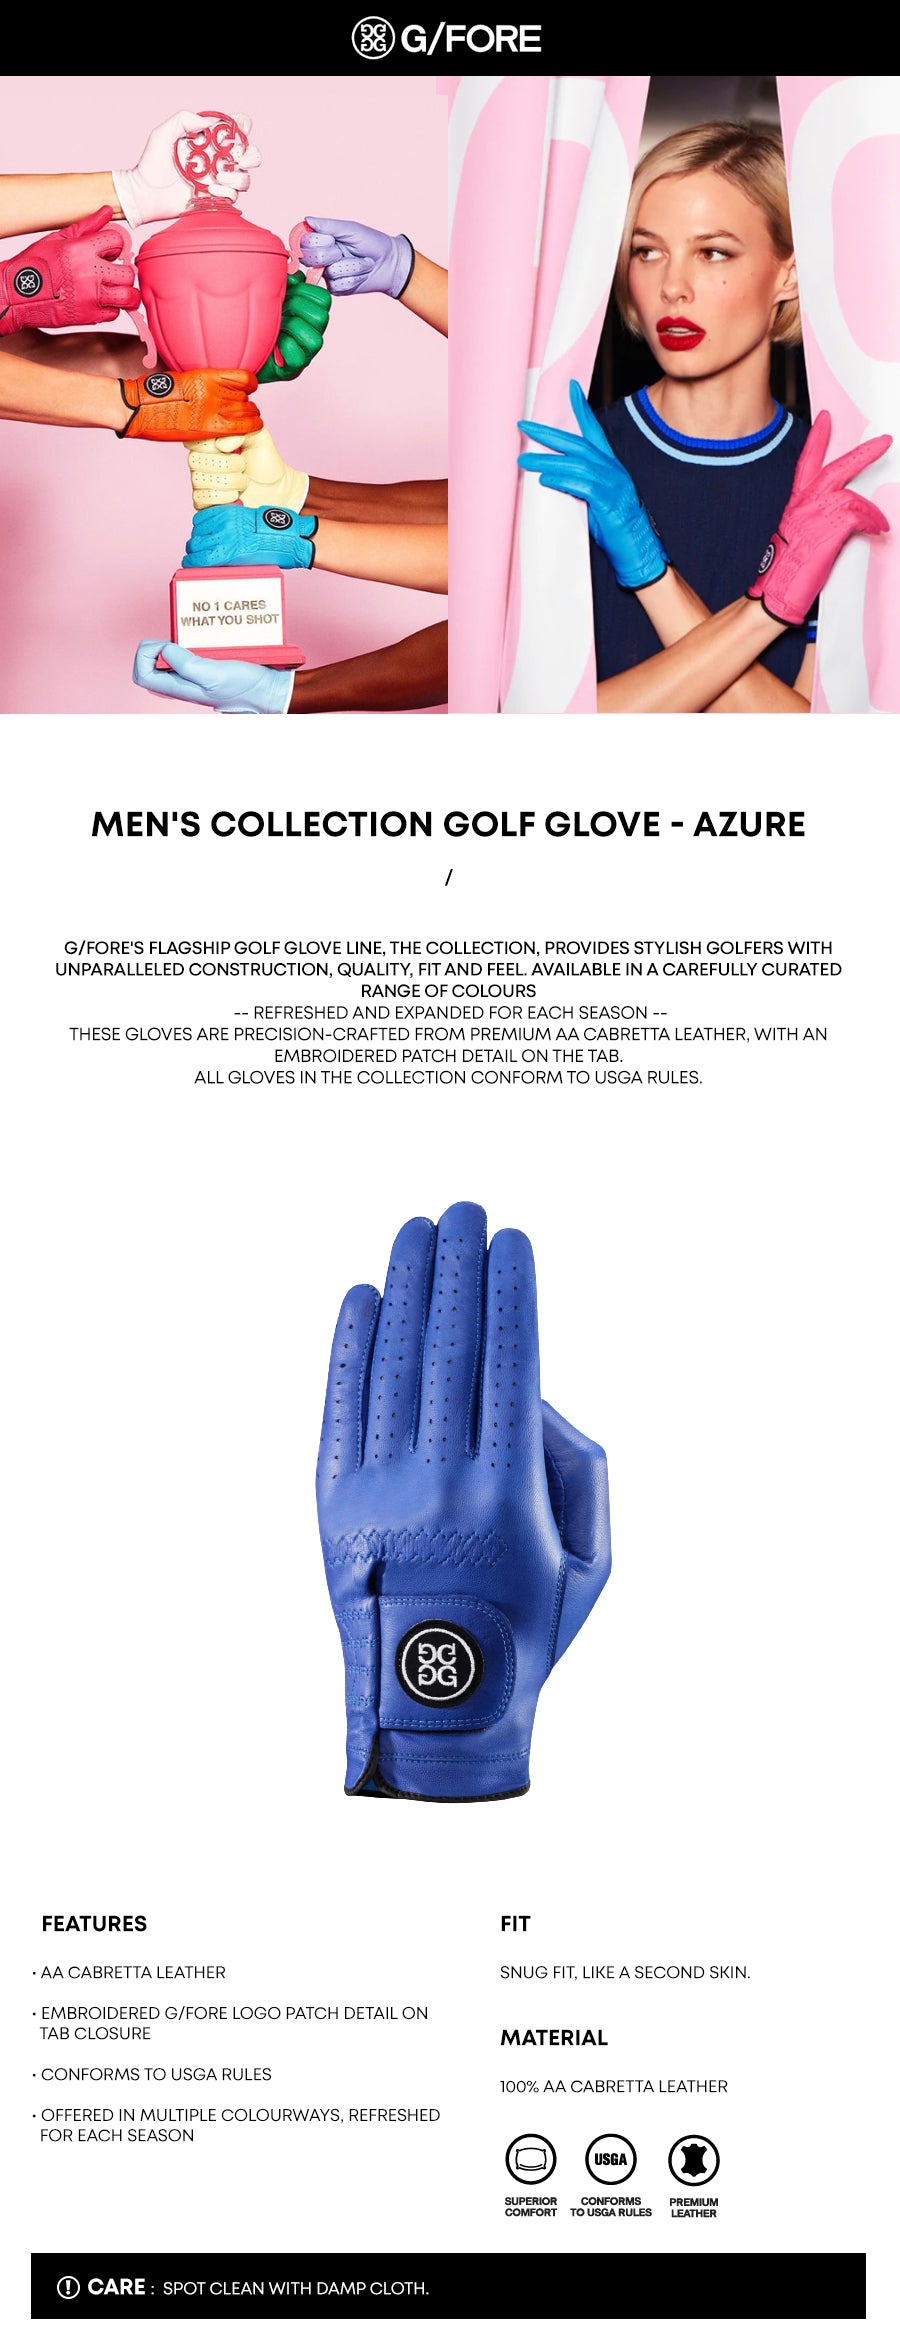 G/FORE-COLLECTION-HOMME-GANTS-GOLF-AZURE